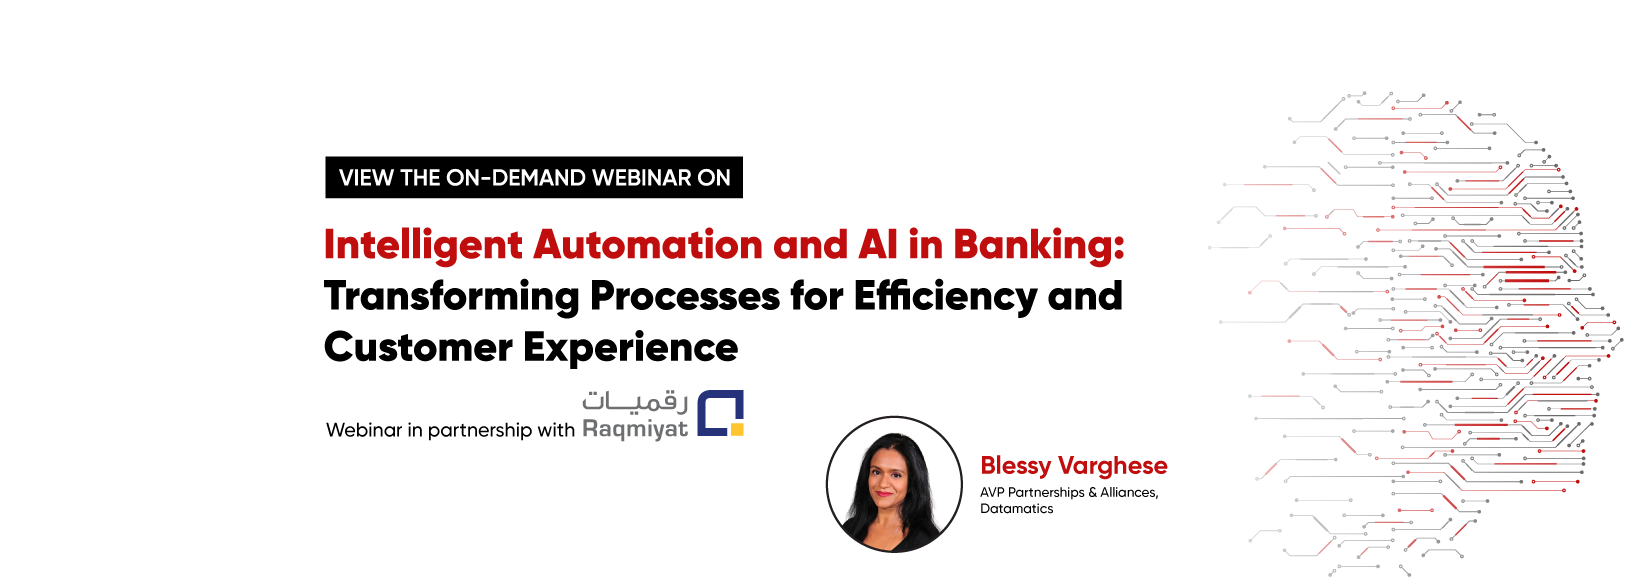 landing-page-Intelligent-Automation-and-AI-in-Banking-Transforming-Processes-for-Efficiency-and-Customer-Experience-3